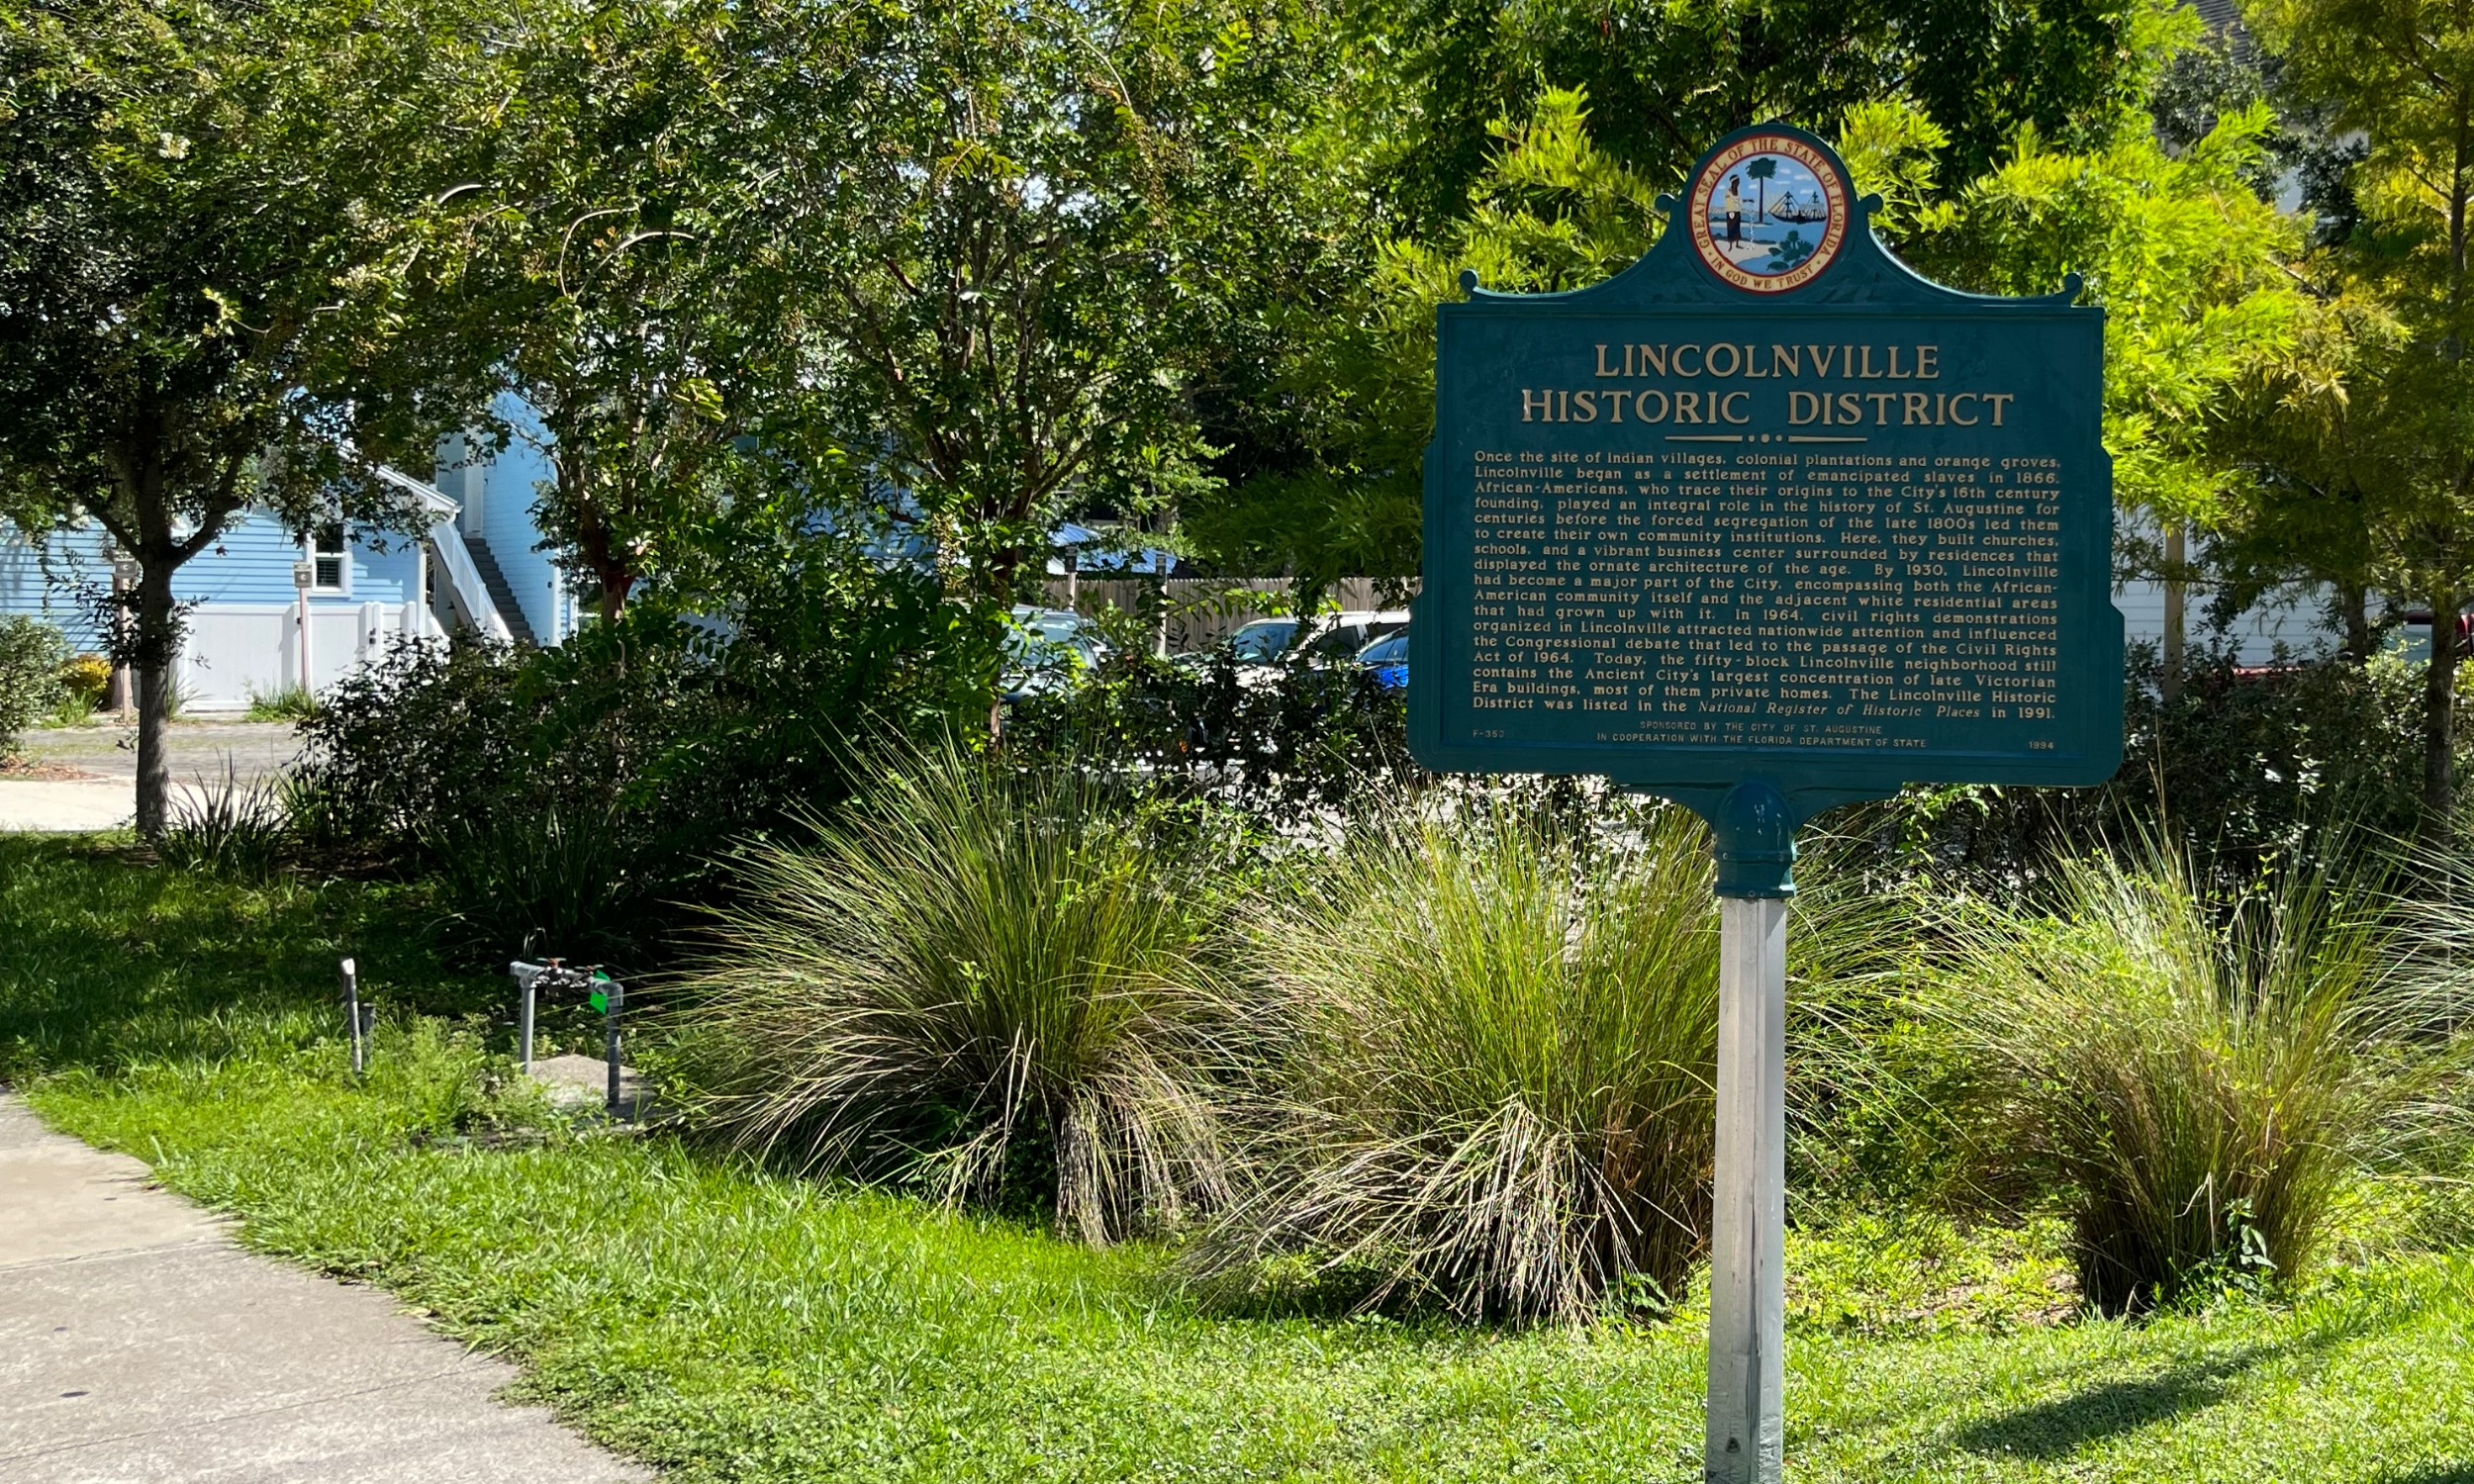 The Lincolnville Historic District is marked by a sign denoting it's importance.